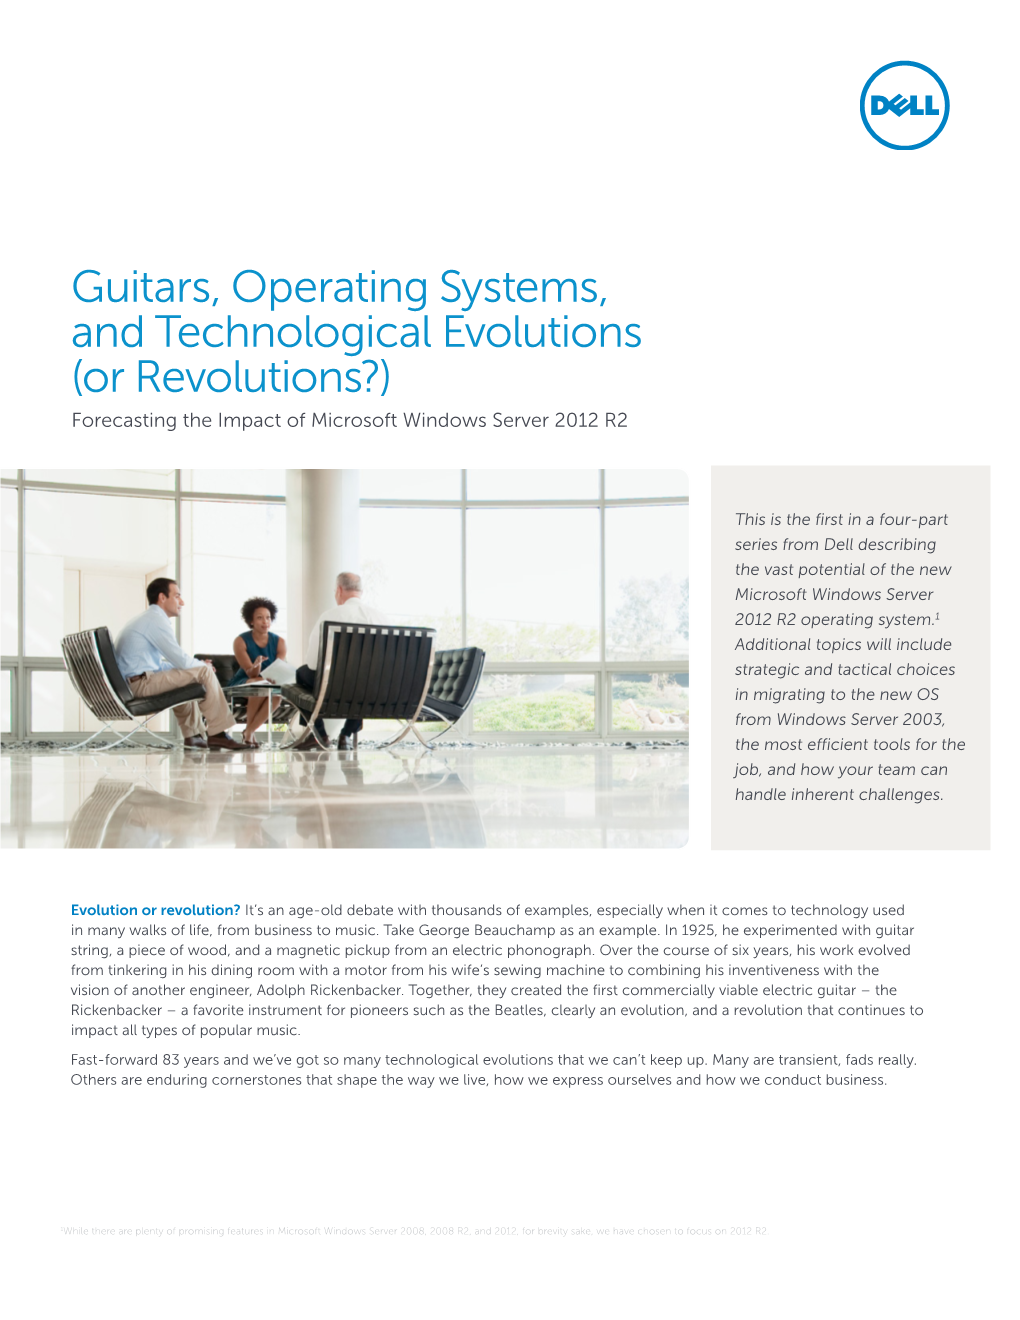 Guitars, Operating Systems, and Technological Evolutions (Or Revolutions?) Forecasting the Impact of Microsoft Windows Server 2012 R2